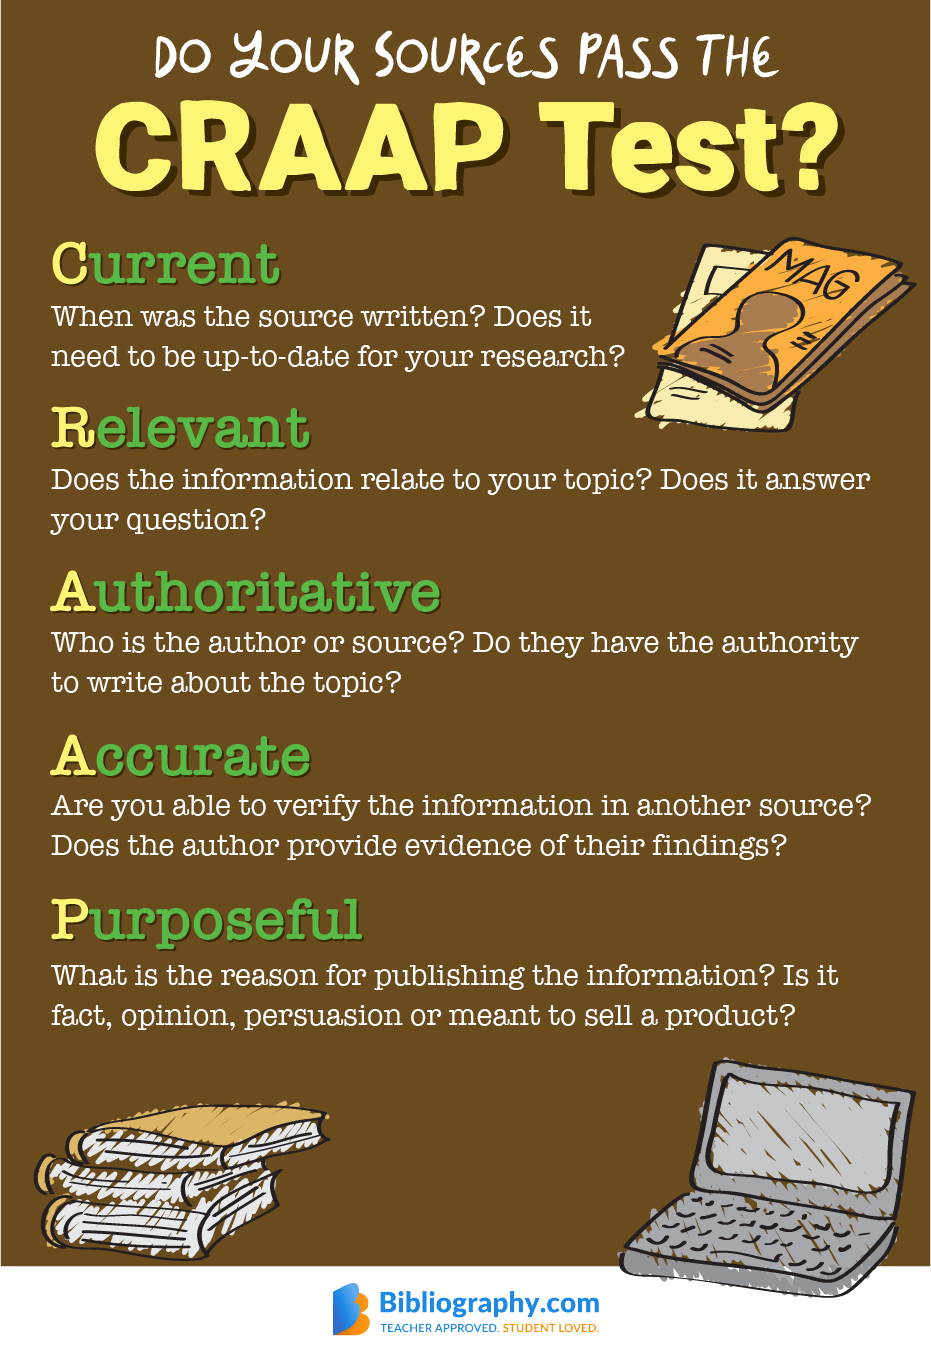 What&'s the more important part of a research paper--your sources or you? And why?